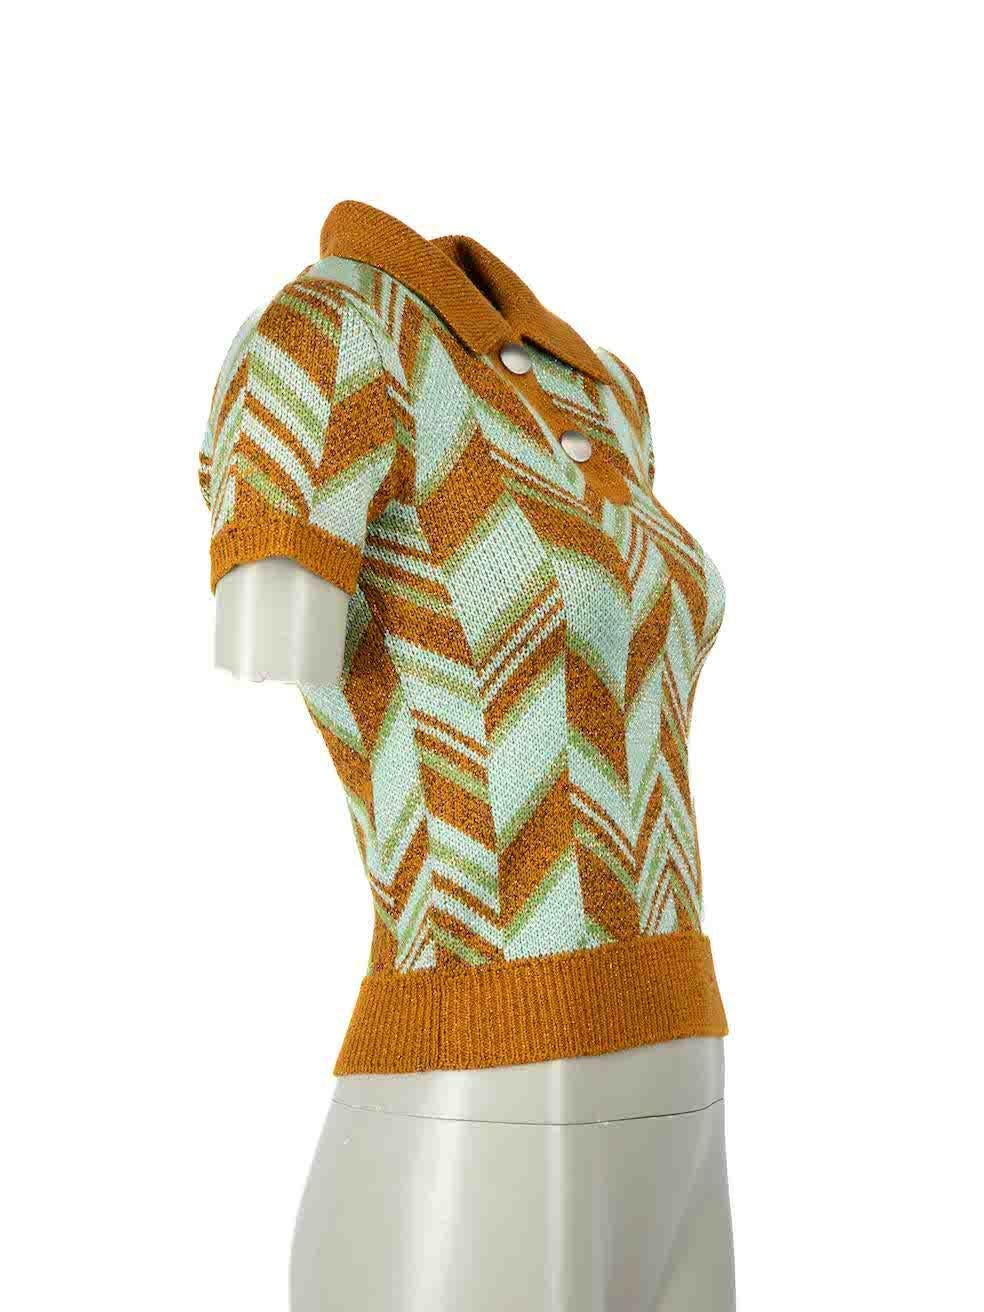 CONDITION is Very good. Minimal wear to top is evident. Minimal tarnishing to the top snap button on this used Miu Miu designer resale item.

Details
Multicolour
Wool
Knit top
Geometric pattern
Short sleeves
Round neck
Snap button fastening
Metallic